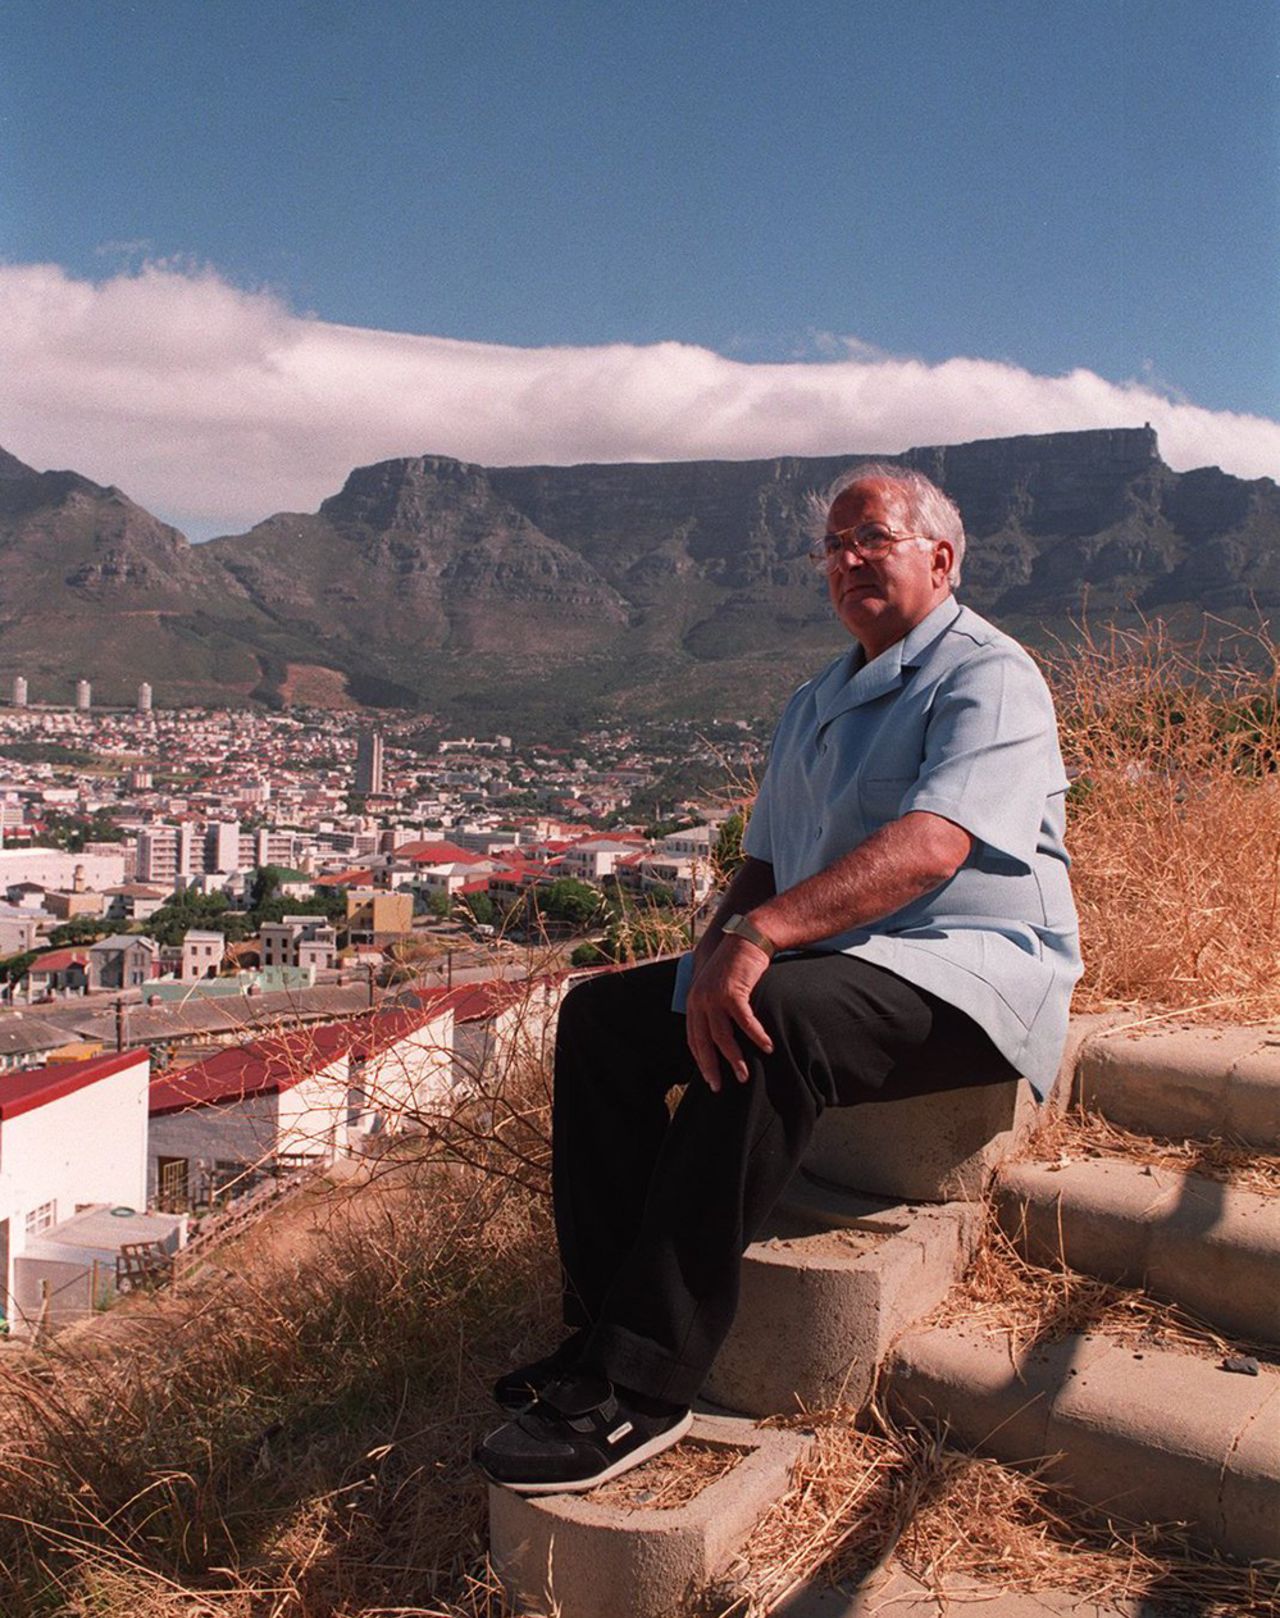 Basil D'Oliviera looks out over Cape Town from upper Bloem Street on Signal Hill where he once lived, November 23, 1995